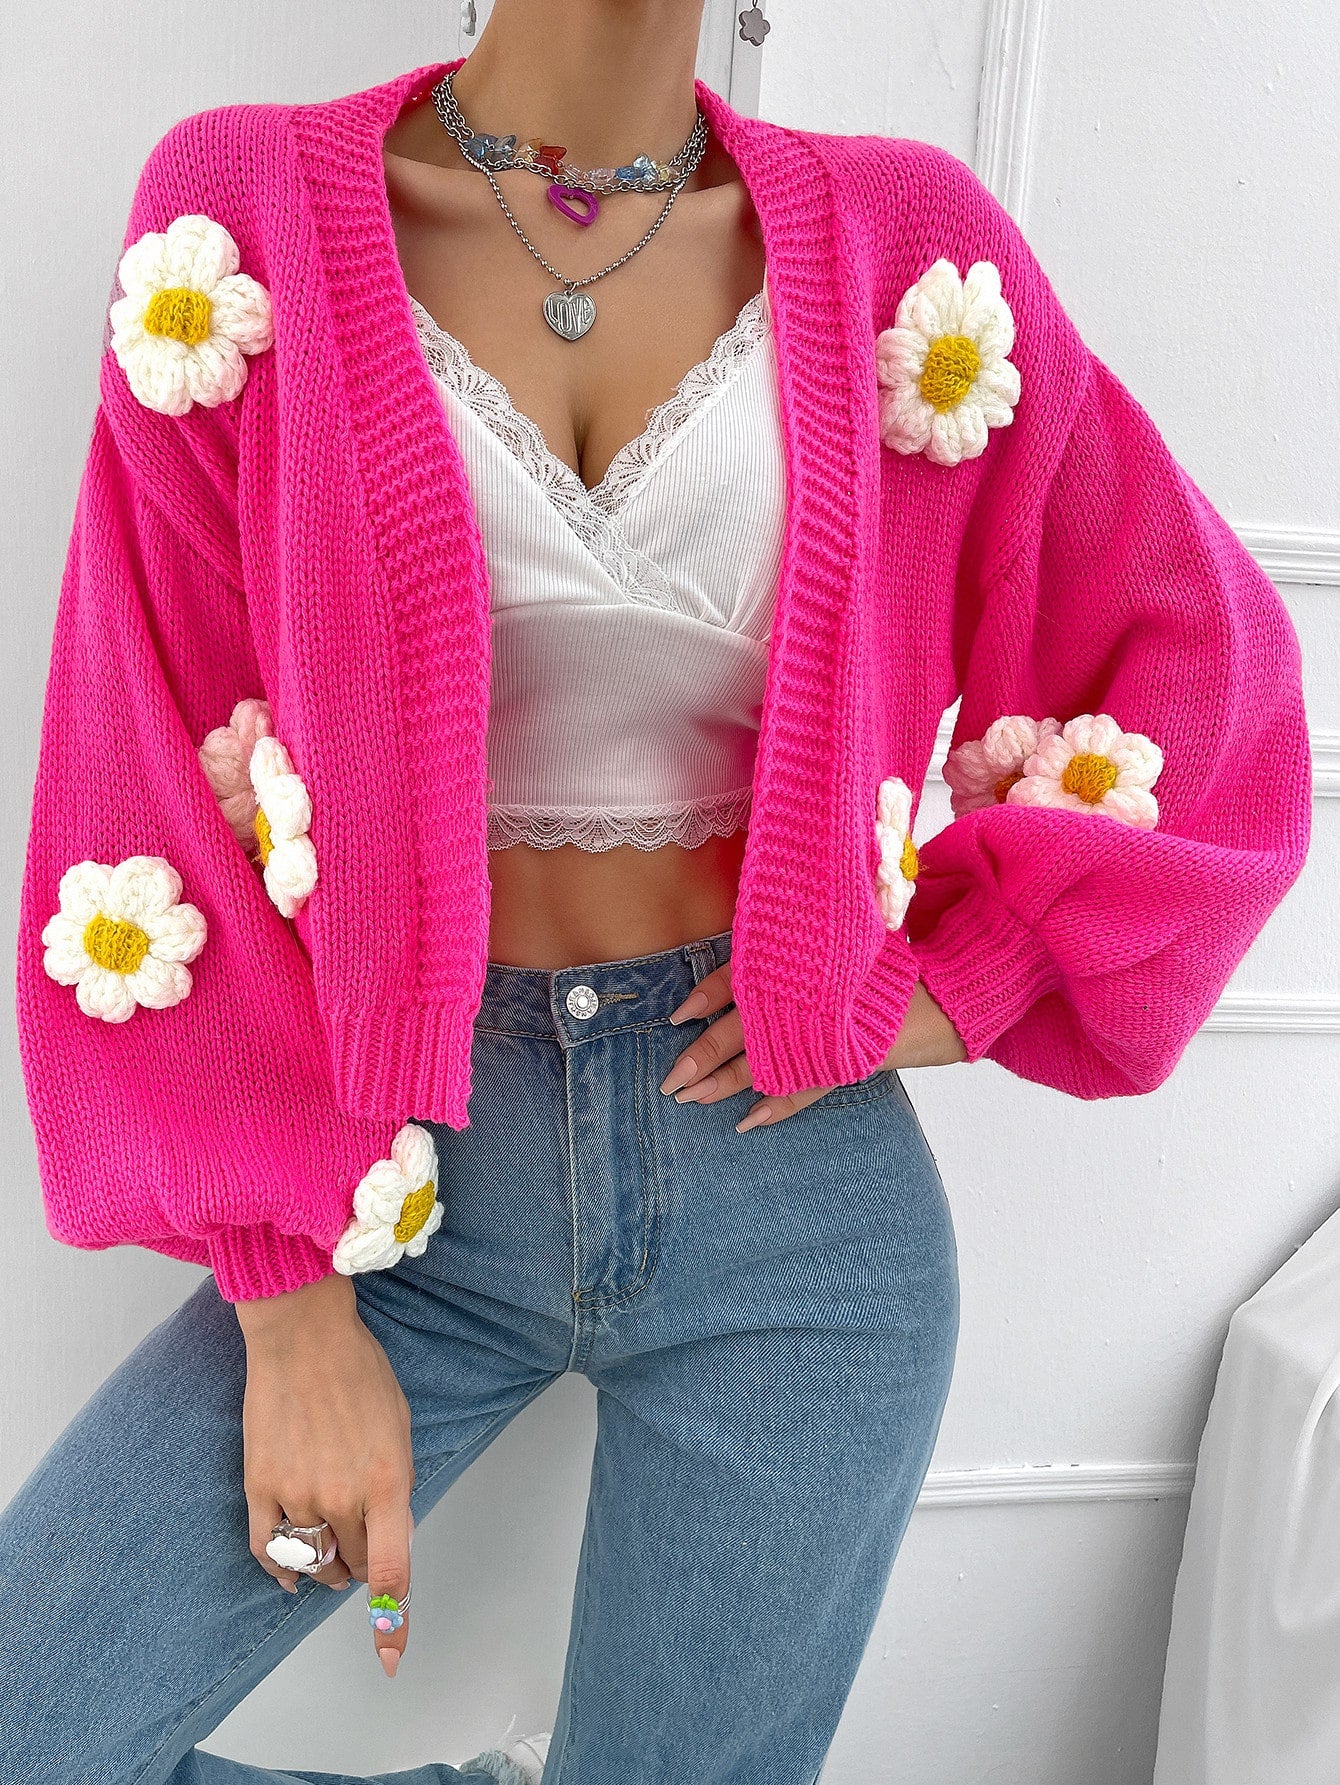 The Cutest Pink Pom Cardigan, Ever!